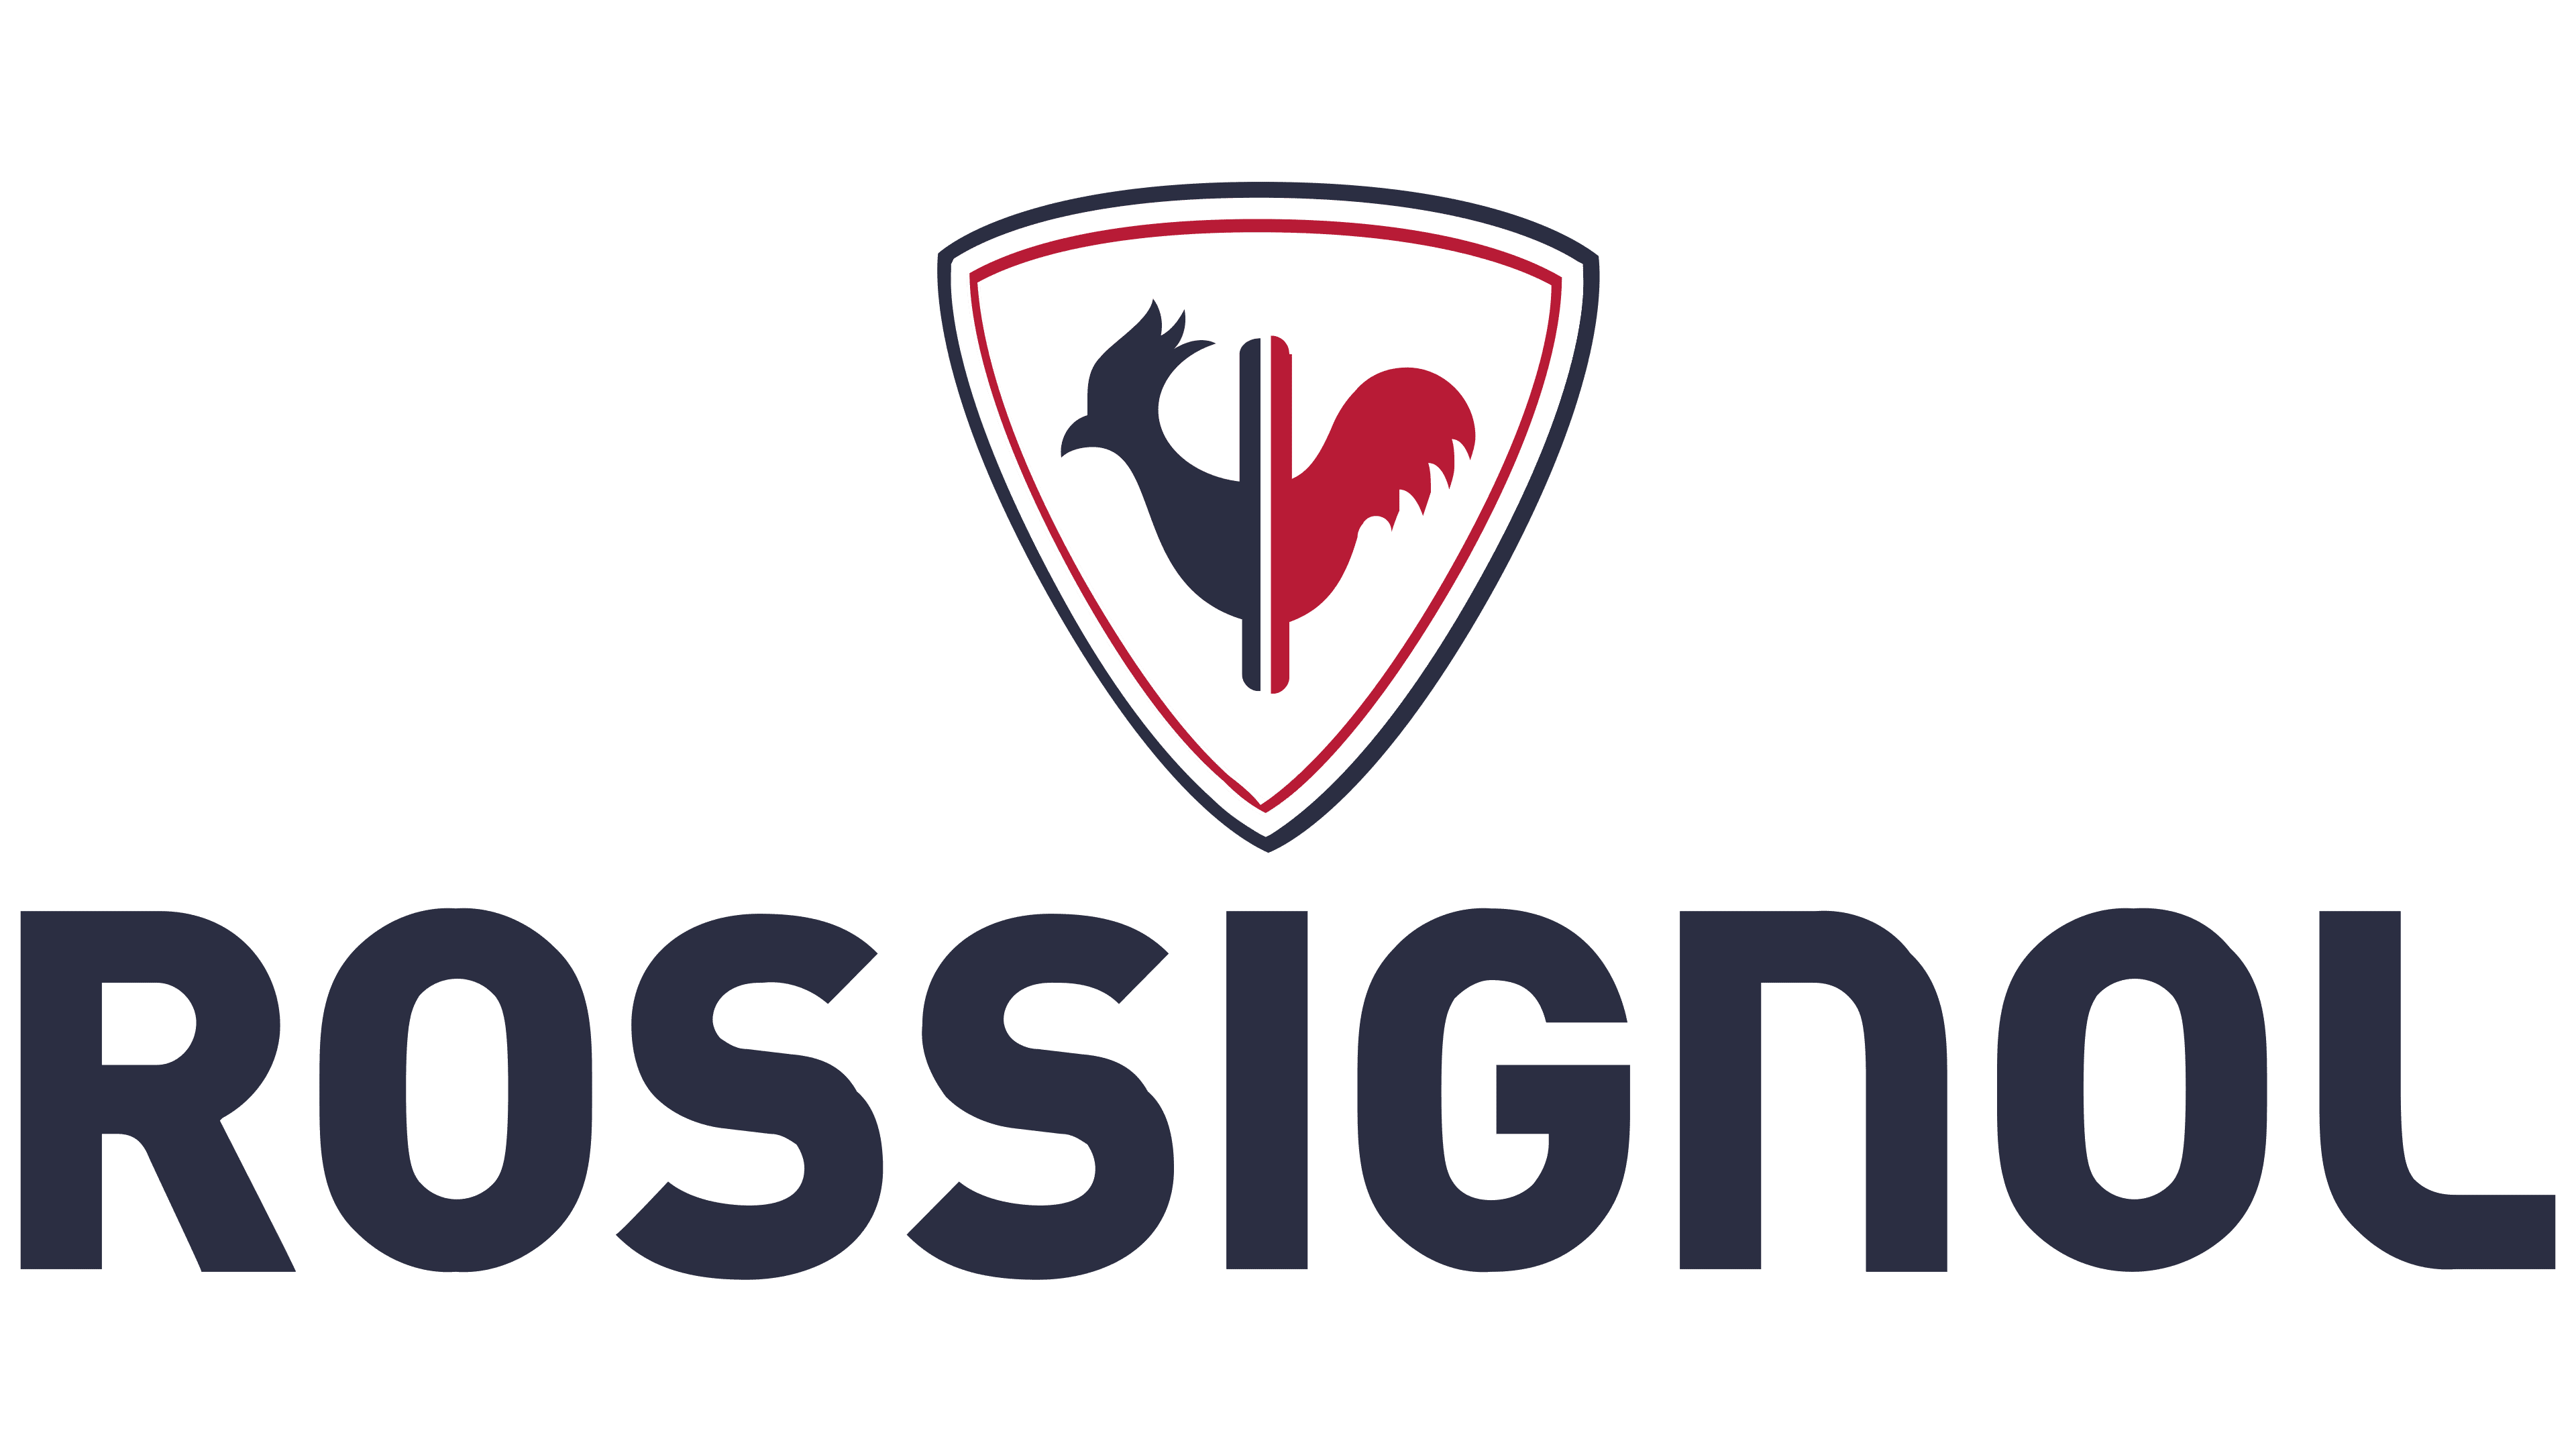 Rossignol Logo, symbol, meaning, history, PNG, brand